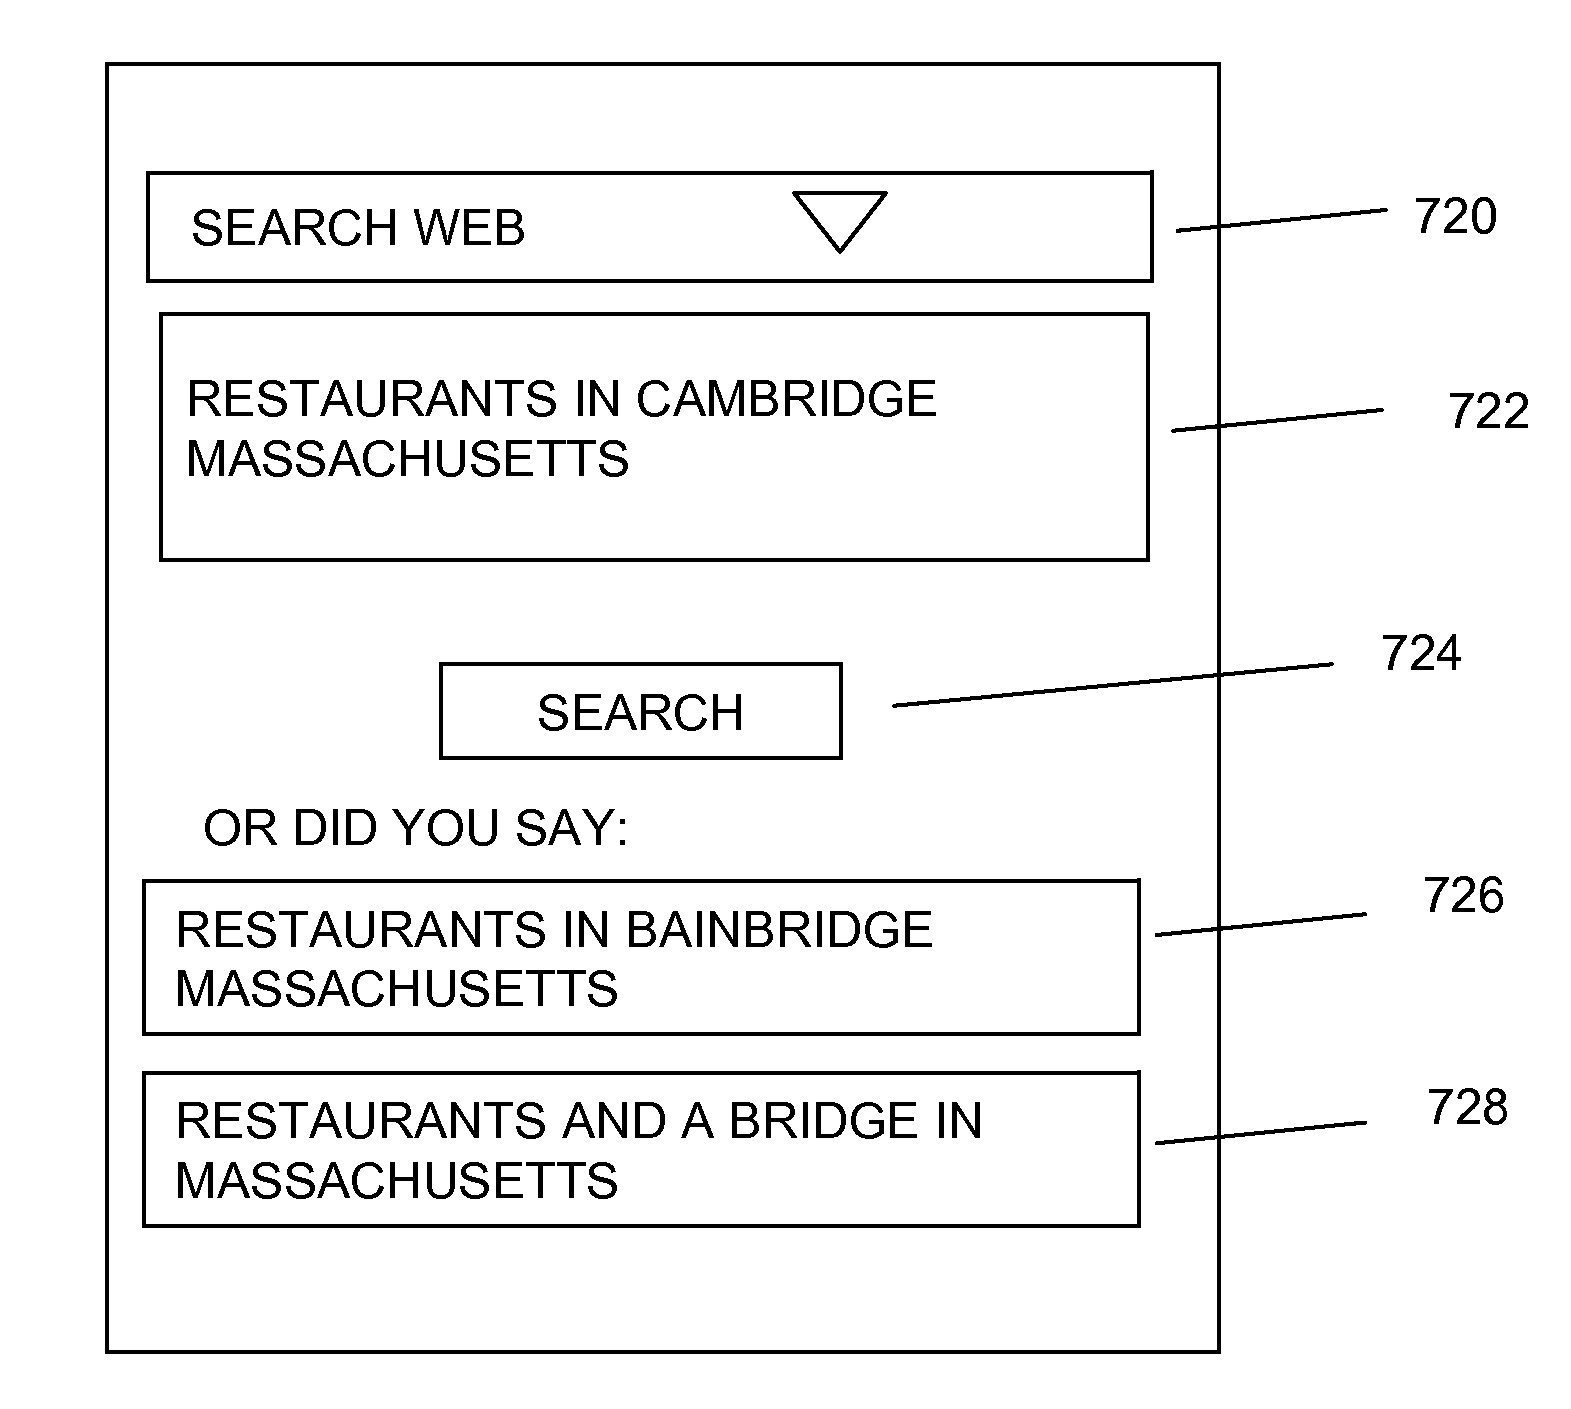 Command and control utilizing content information in a mobile voice-to-speech application